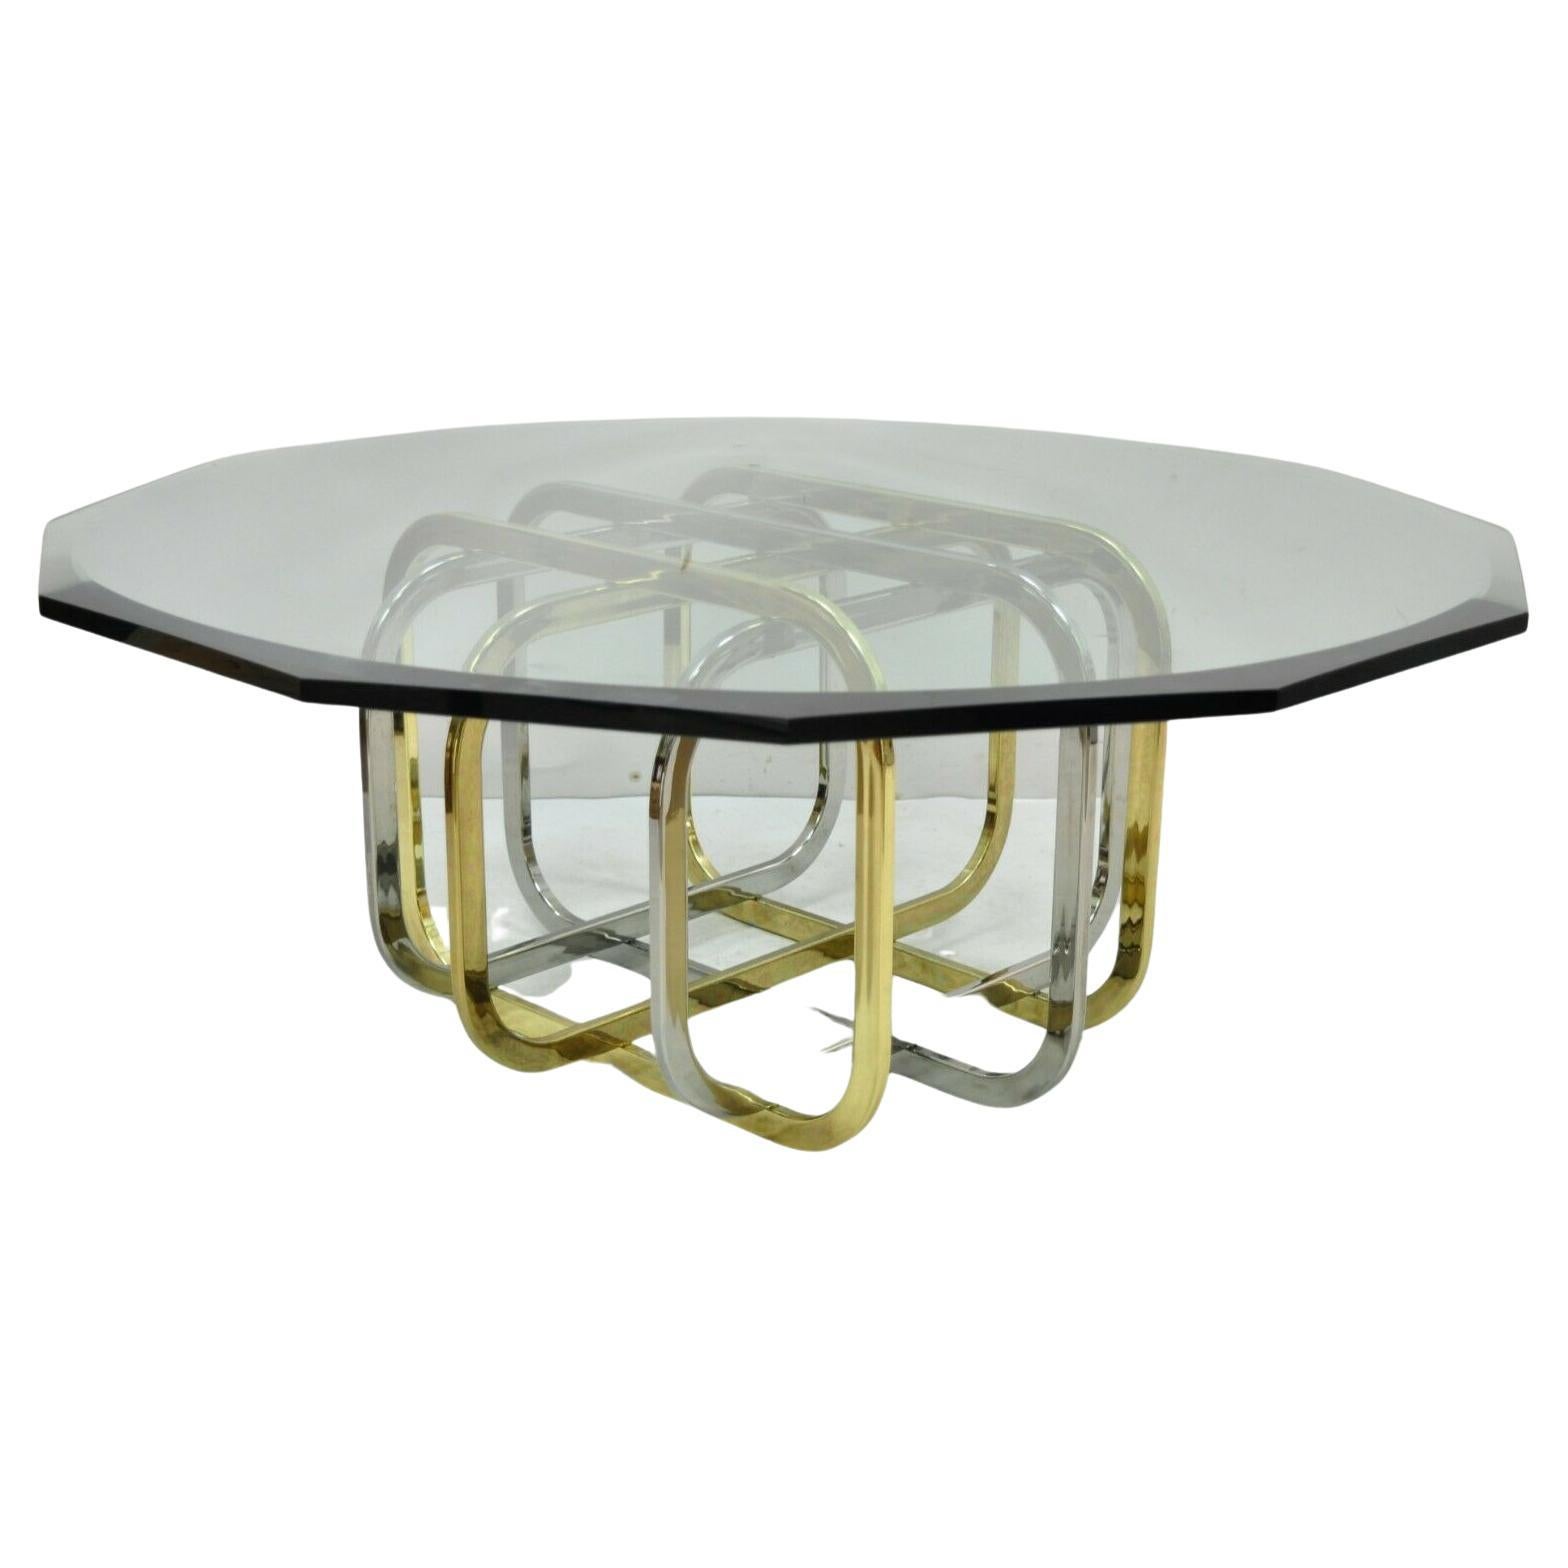 Pierre Cardin Style Brass and Chrome Folding Metal Base Glass Top Coffee Table